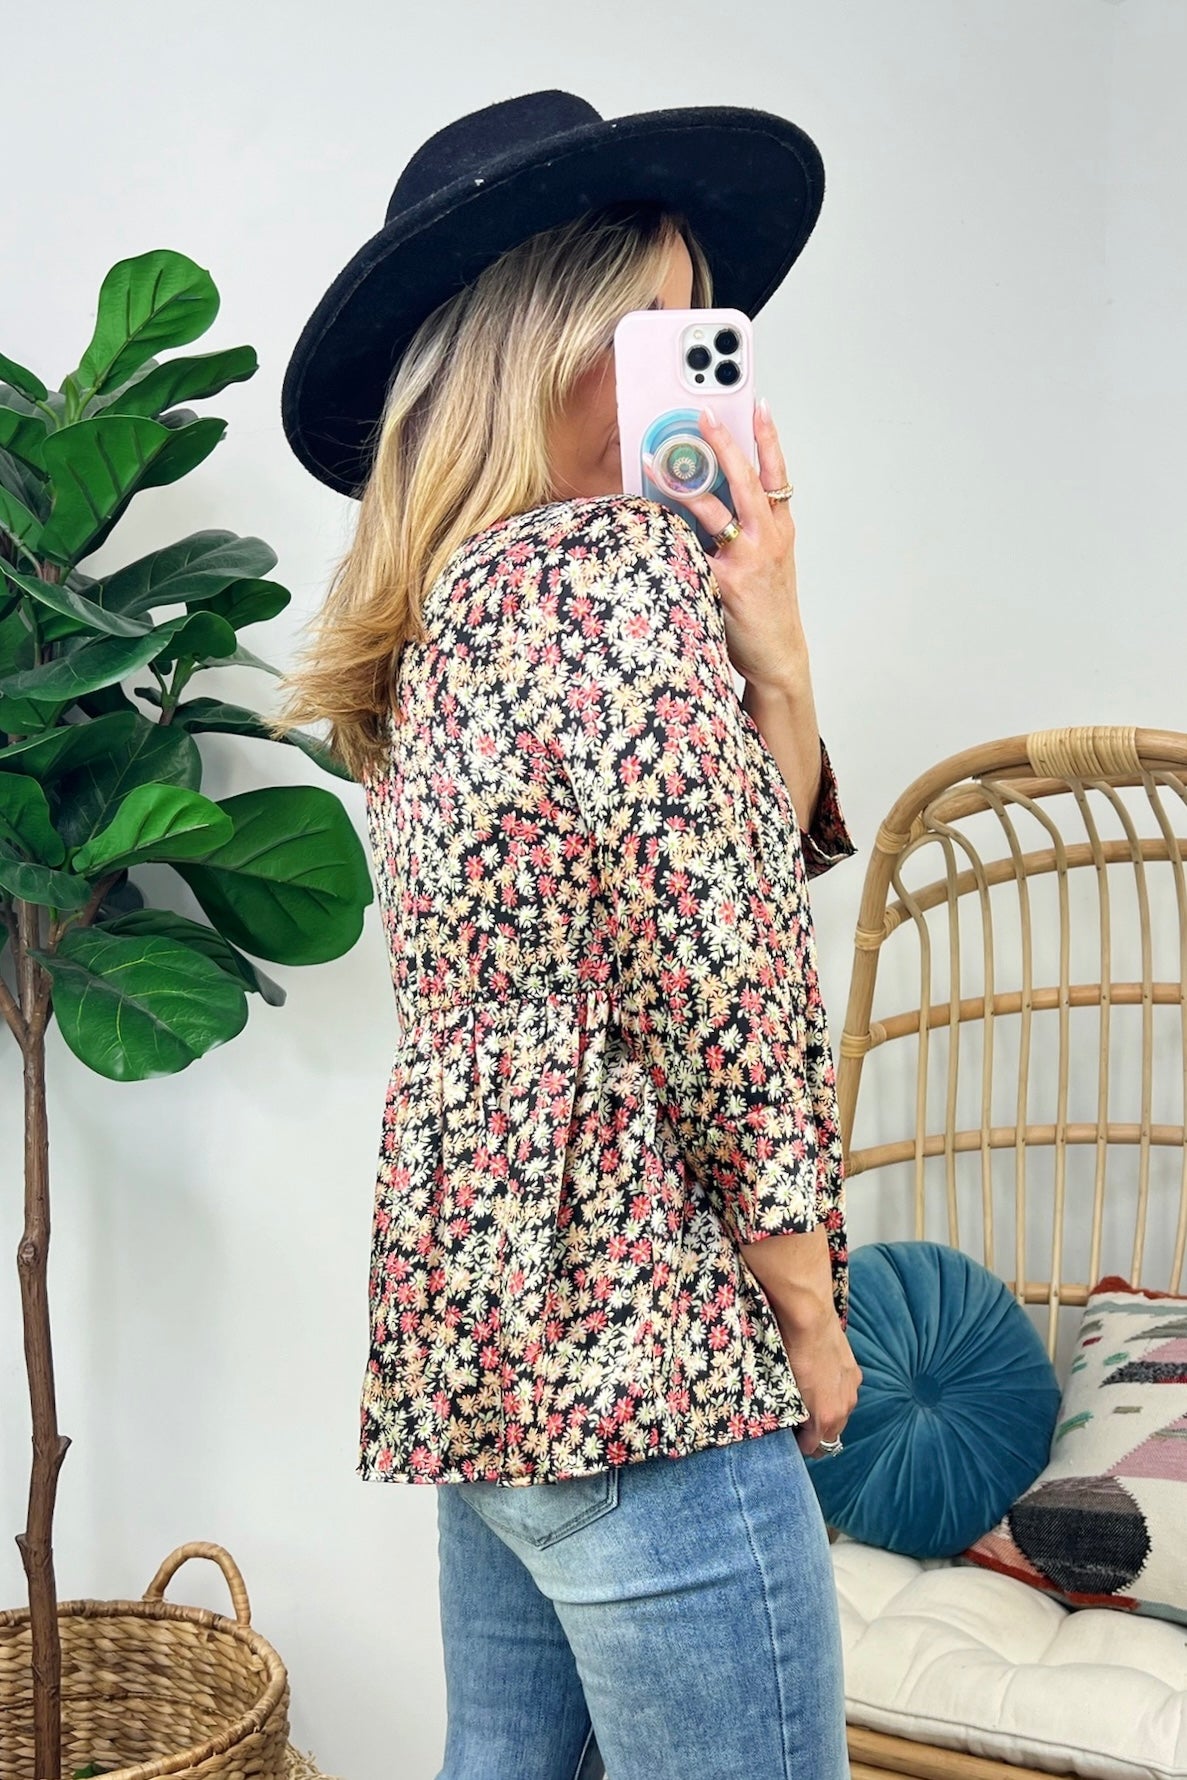  Rossi 3/4 Sleeve Floral Flowy Top - Madison and Mallory